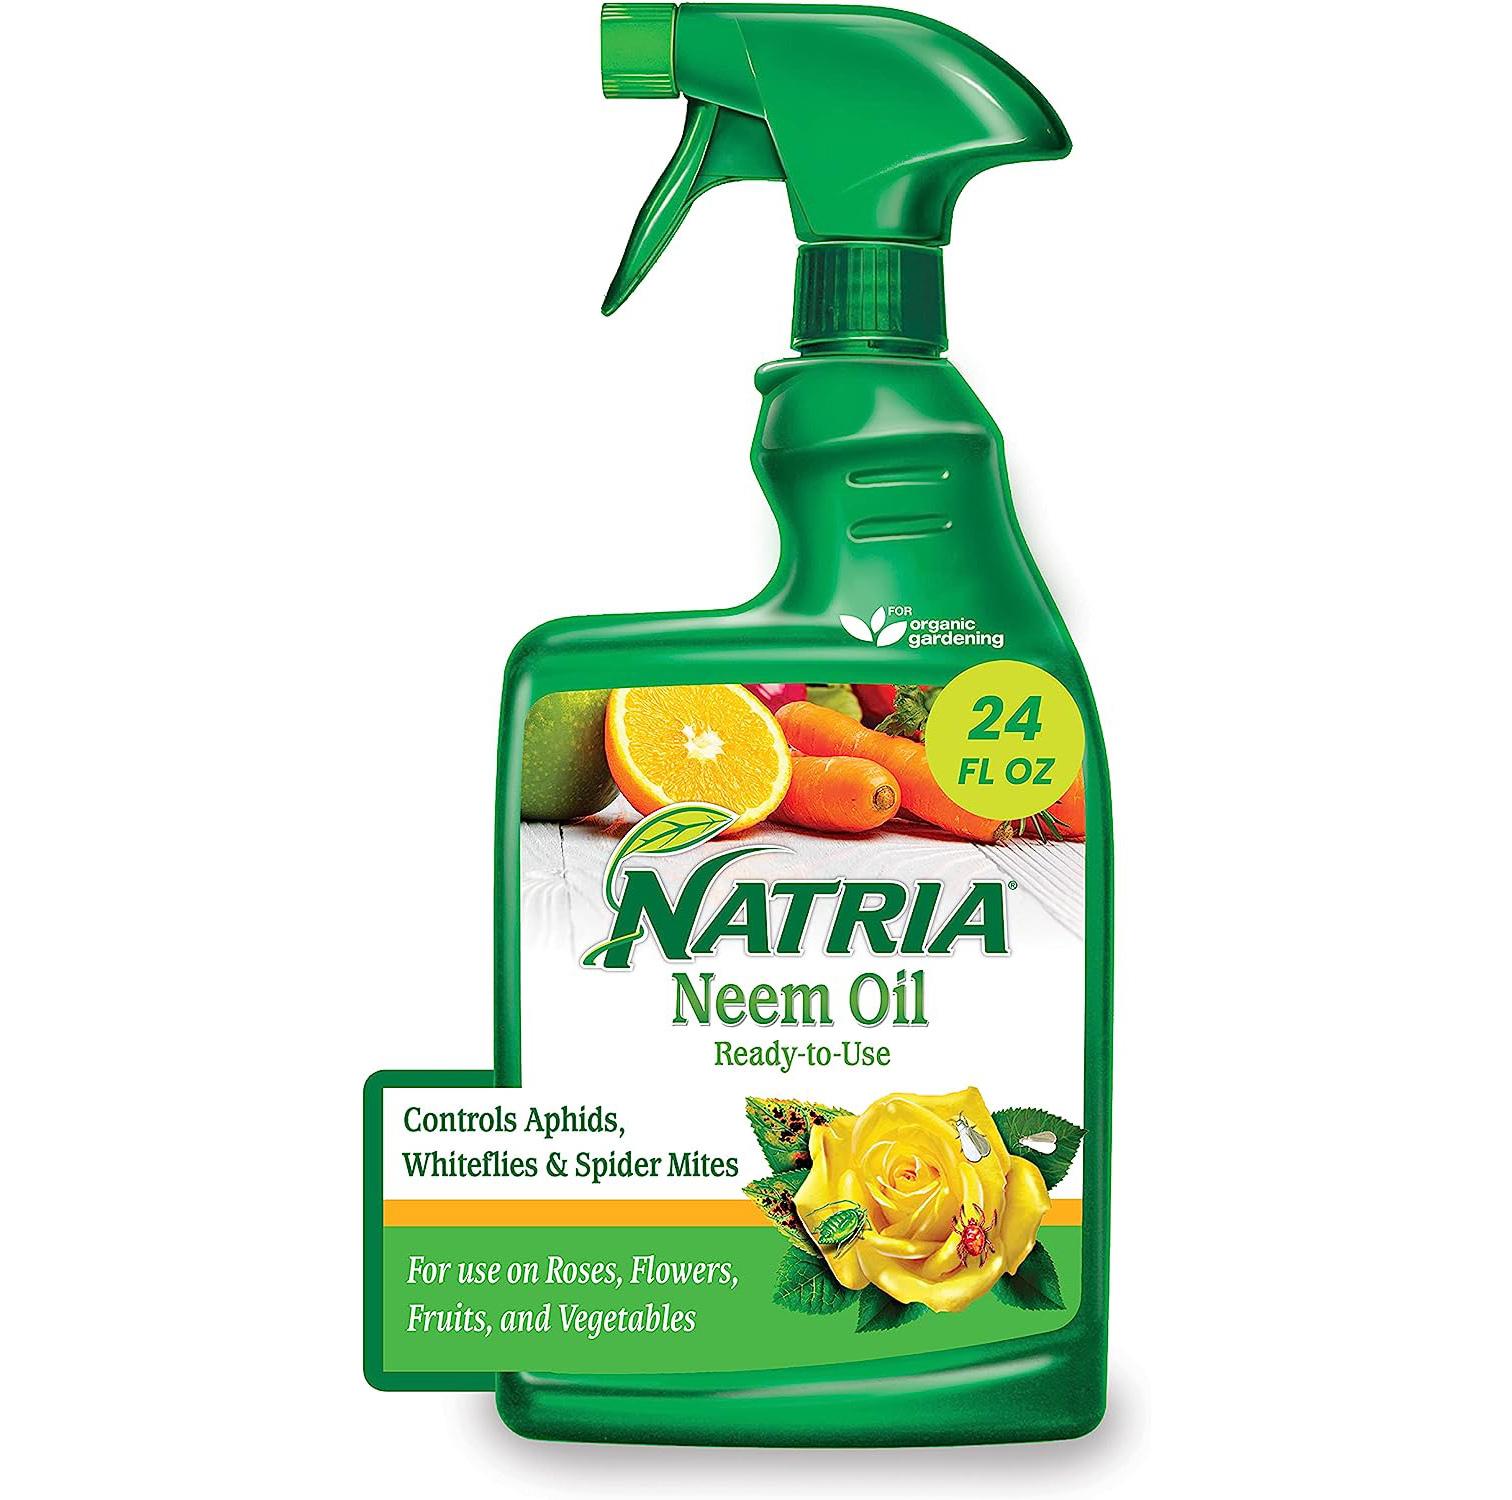 Natria Ready-to-Use Neem Oil Plants Insects Spray 706250A for $6.29